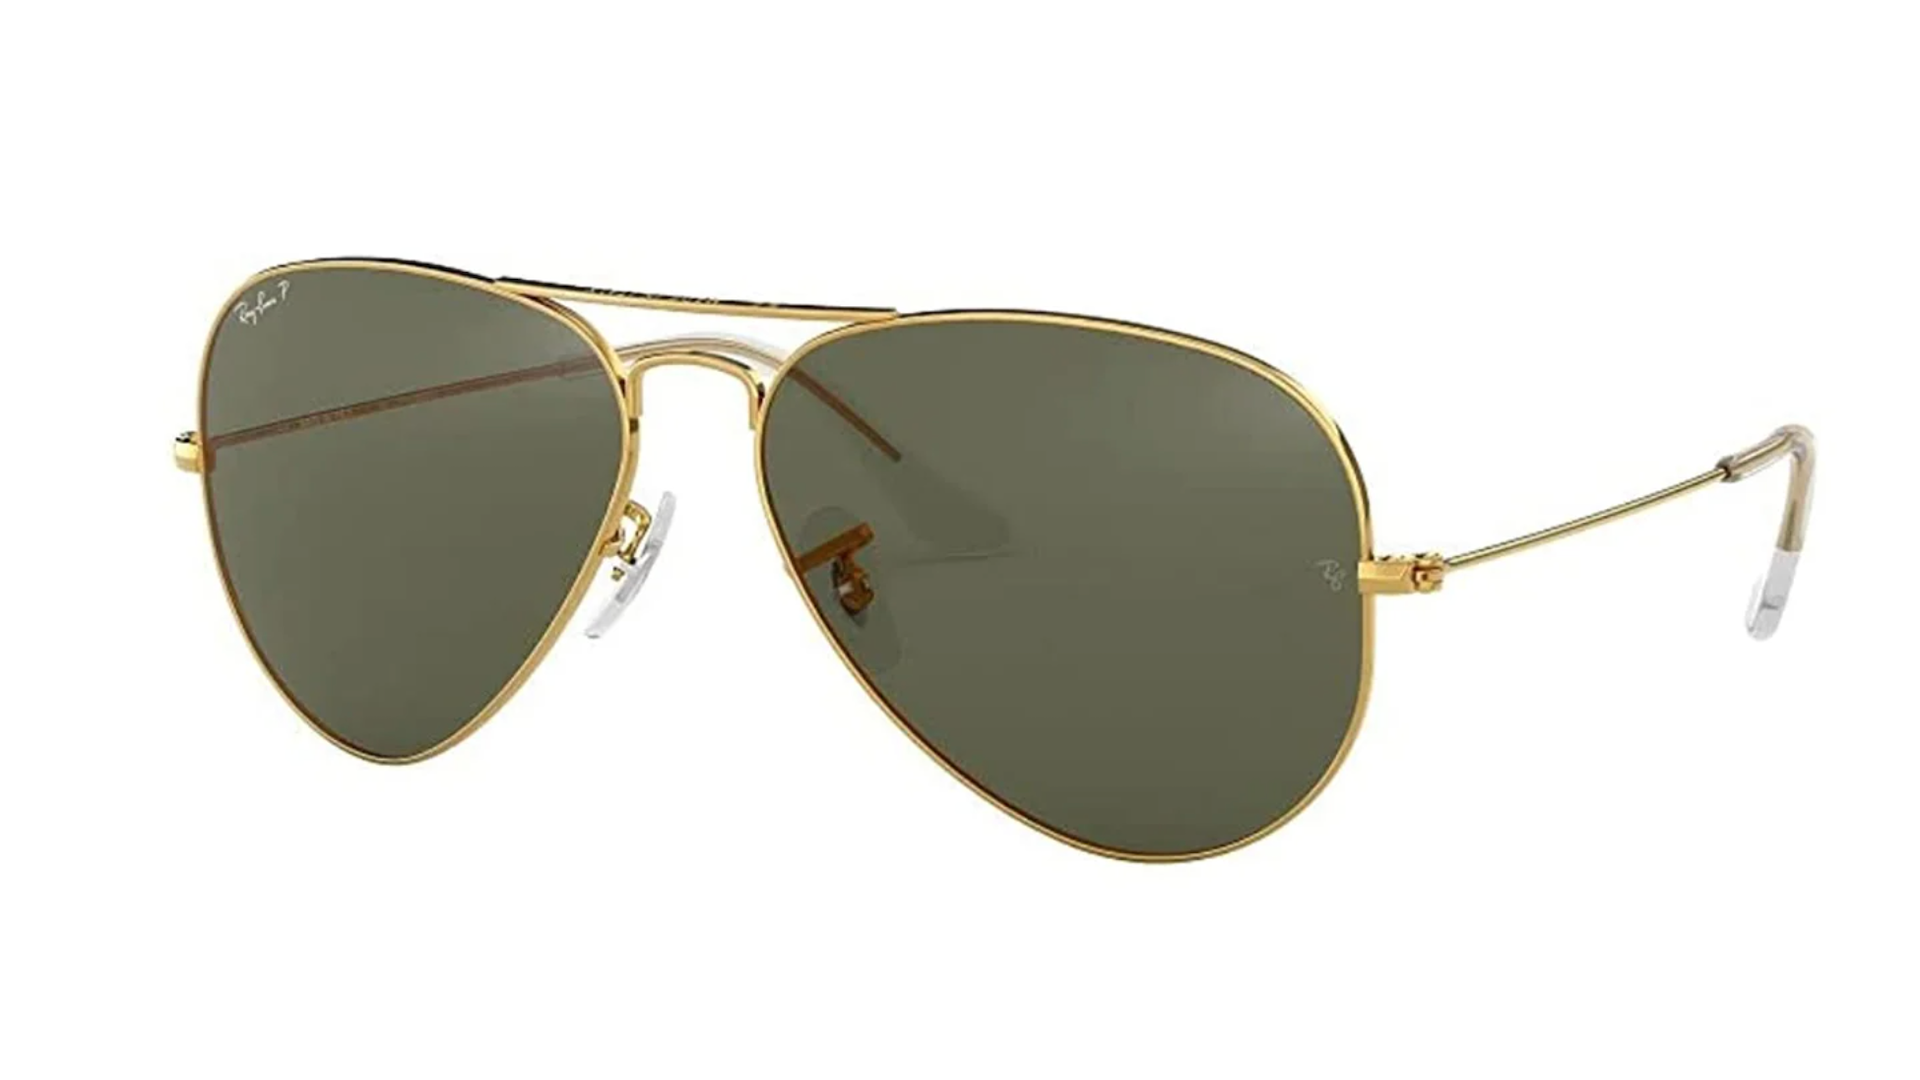 The best and Ray-Ban sunglasses deals for Amazon 2022